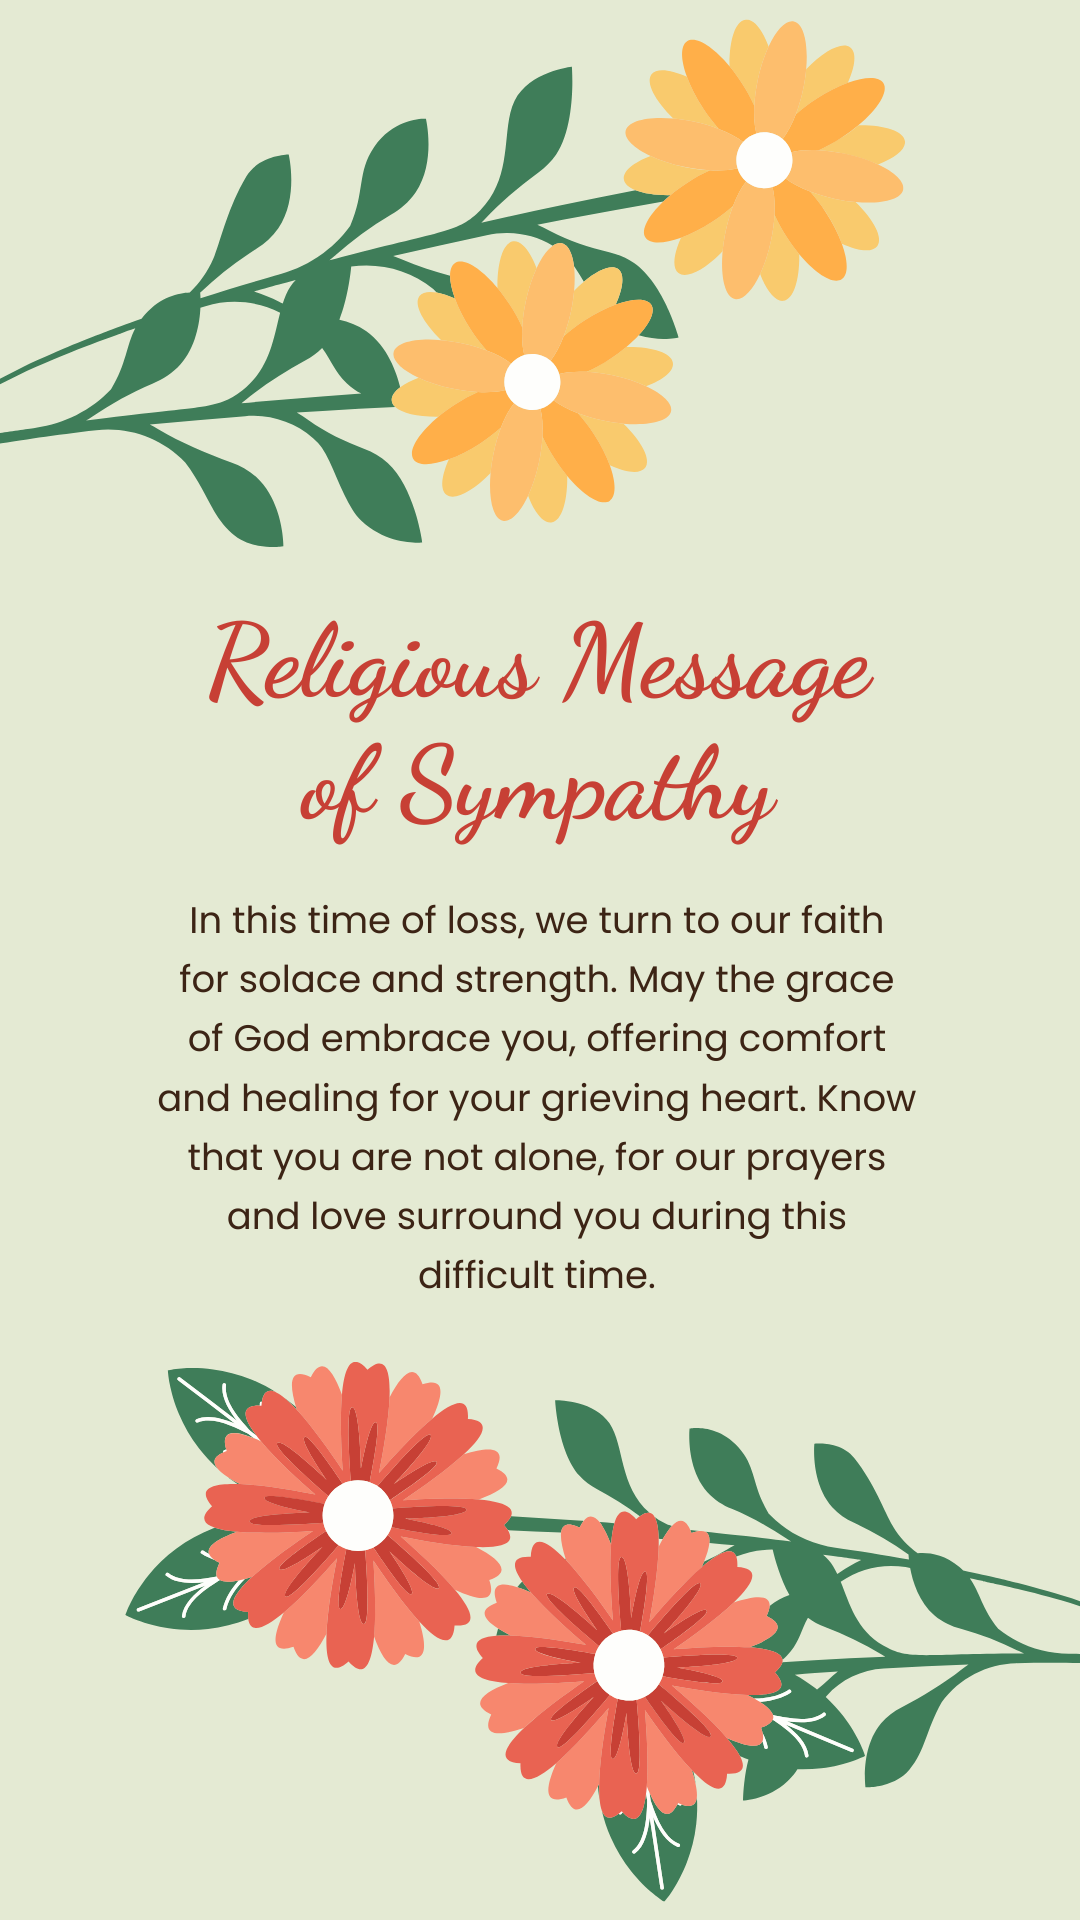 Religious Message of Sympathy